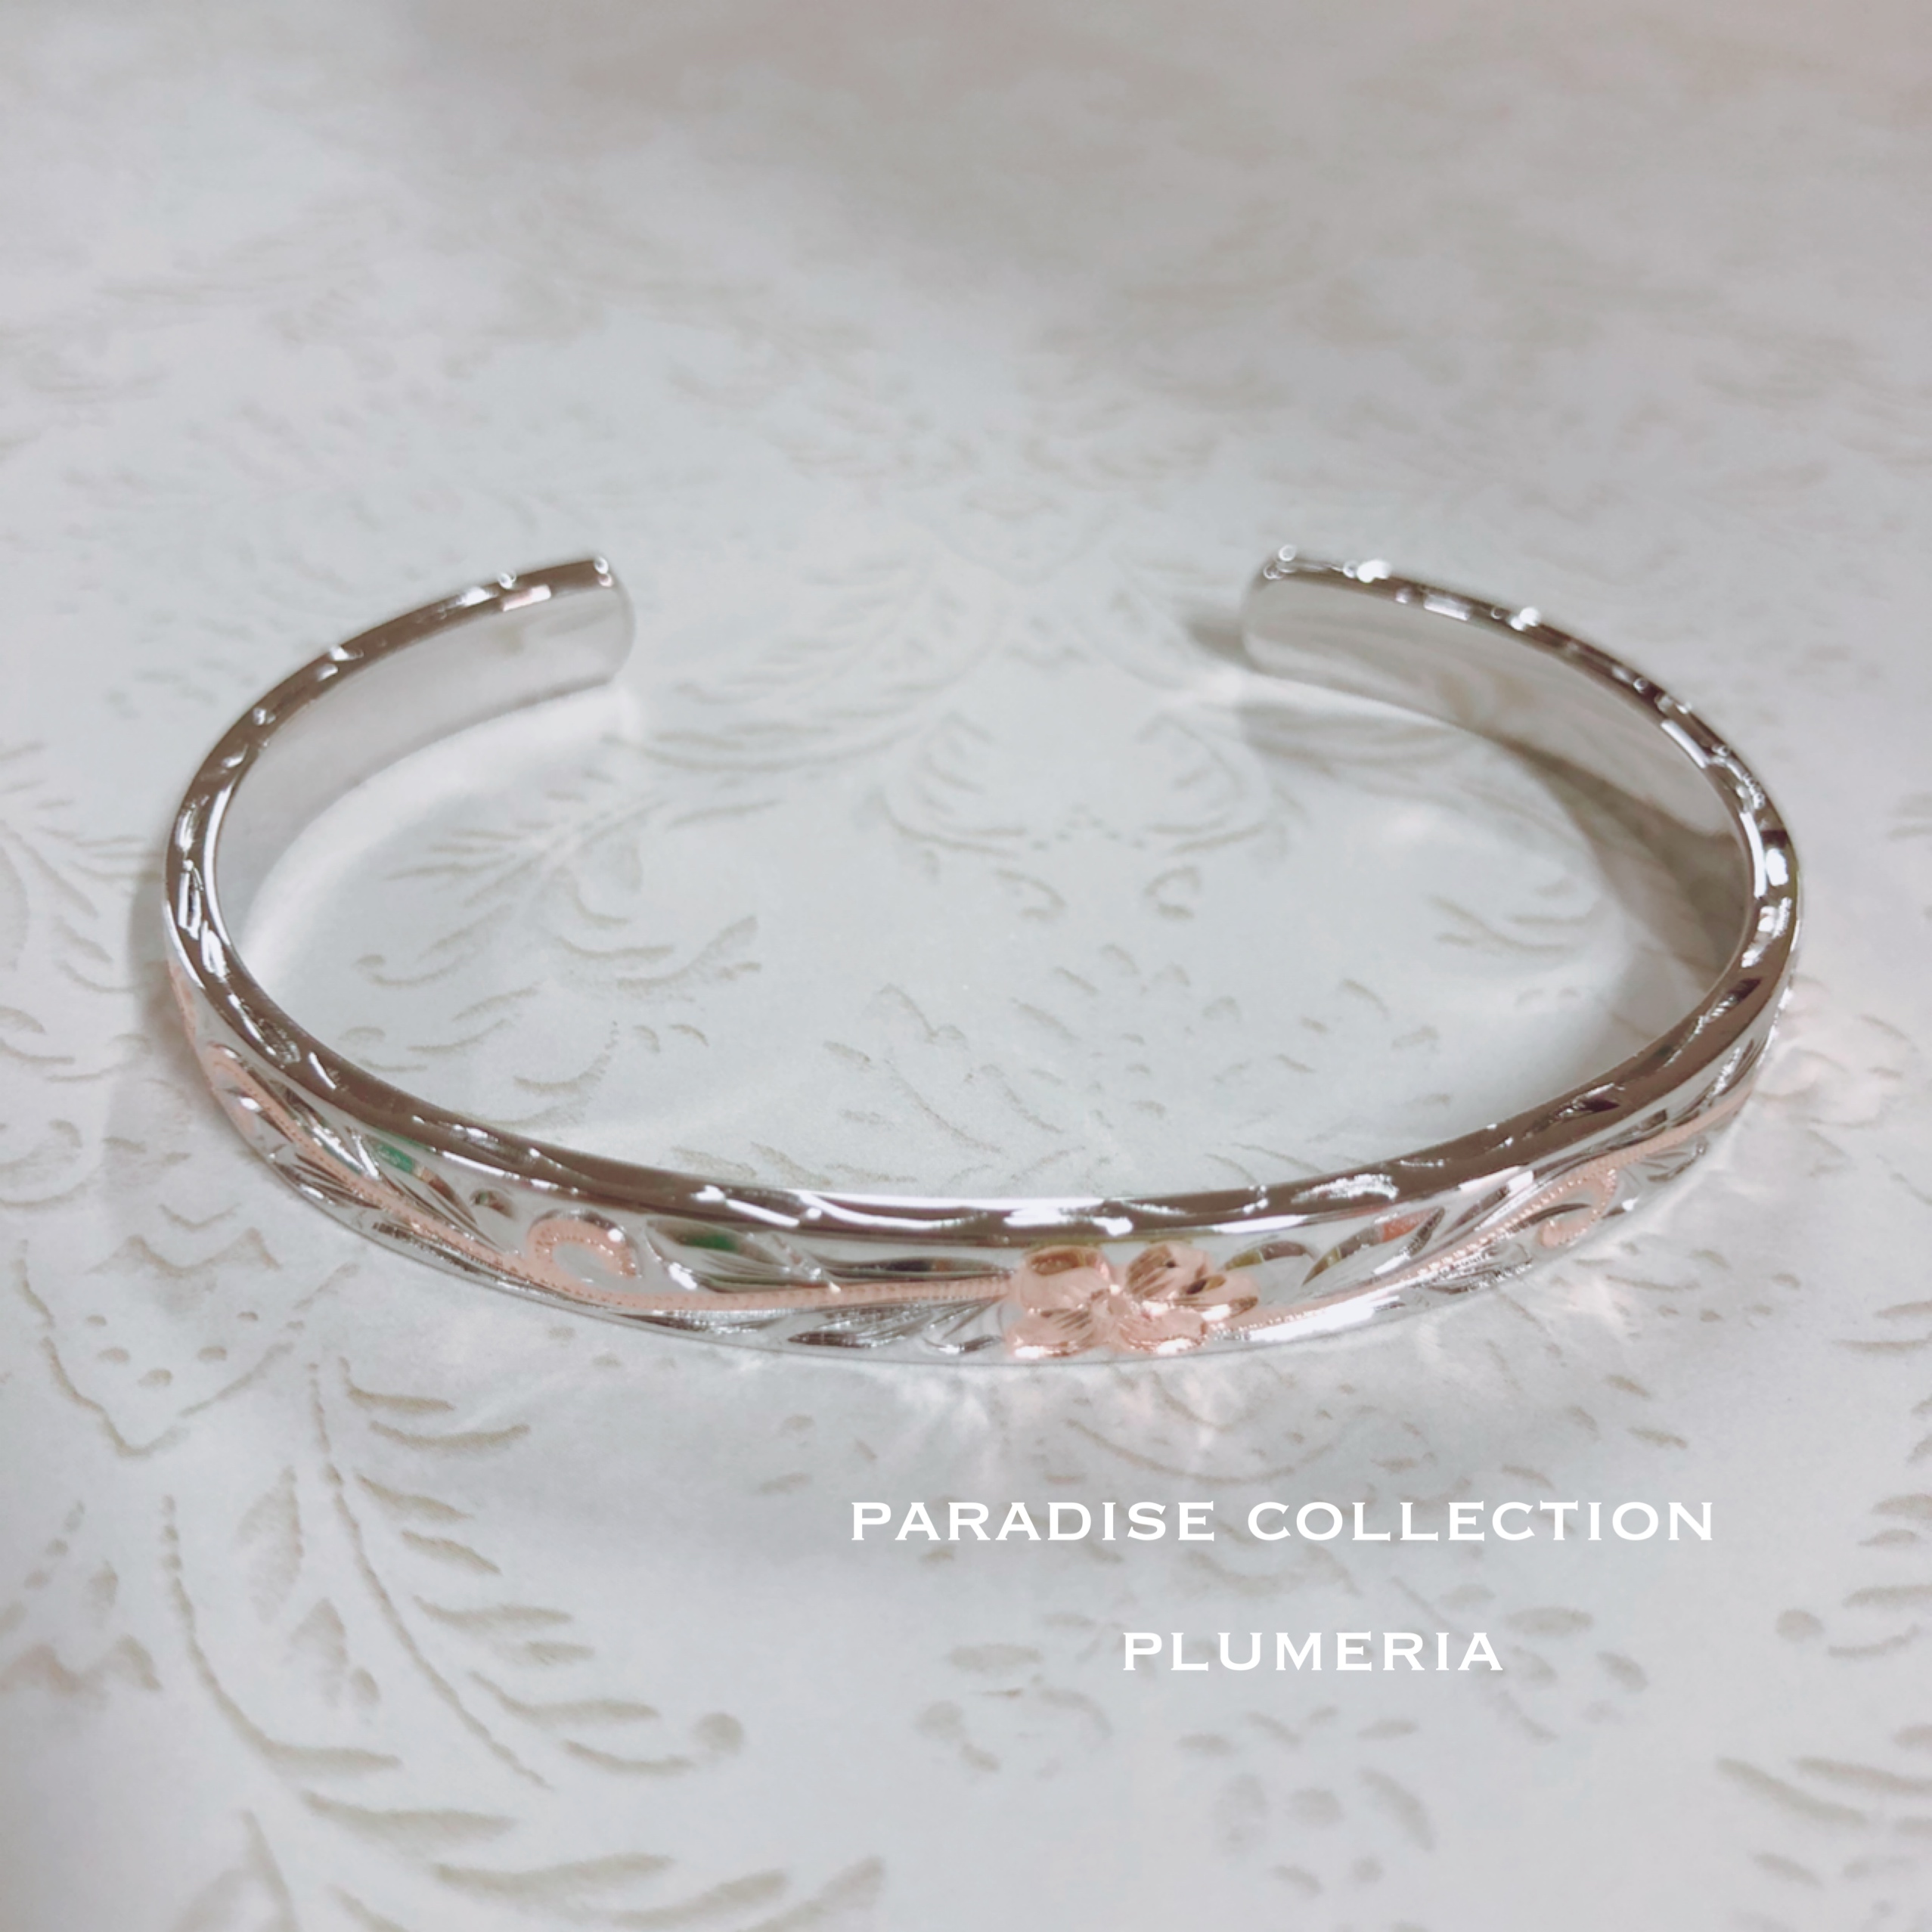 Paradise Collection oO vAuX